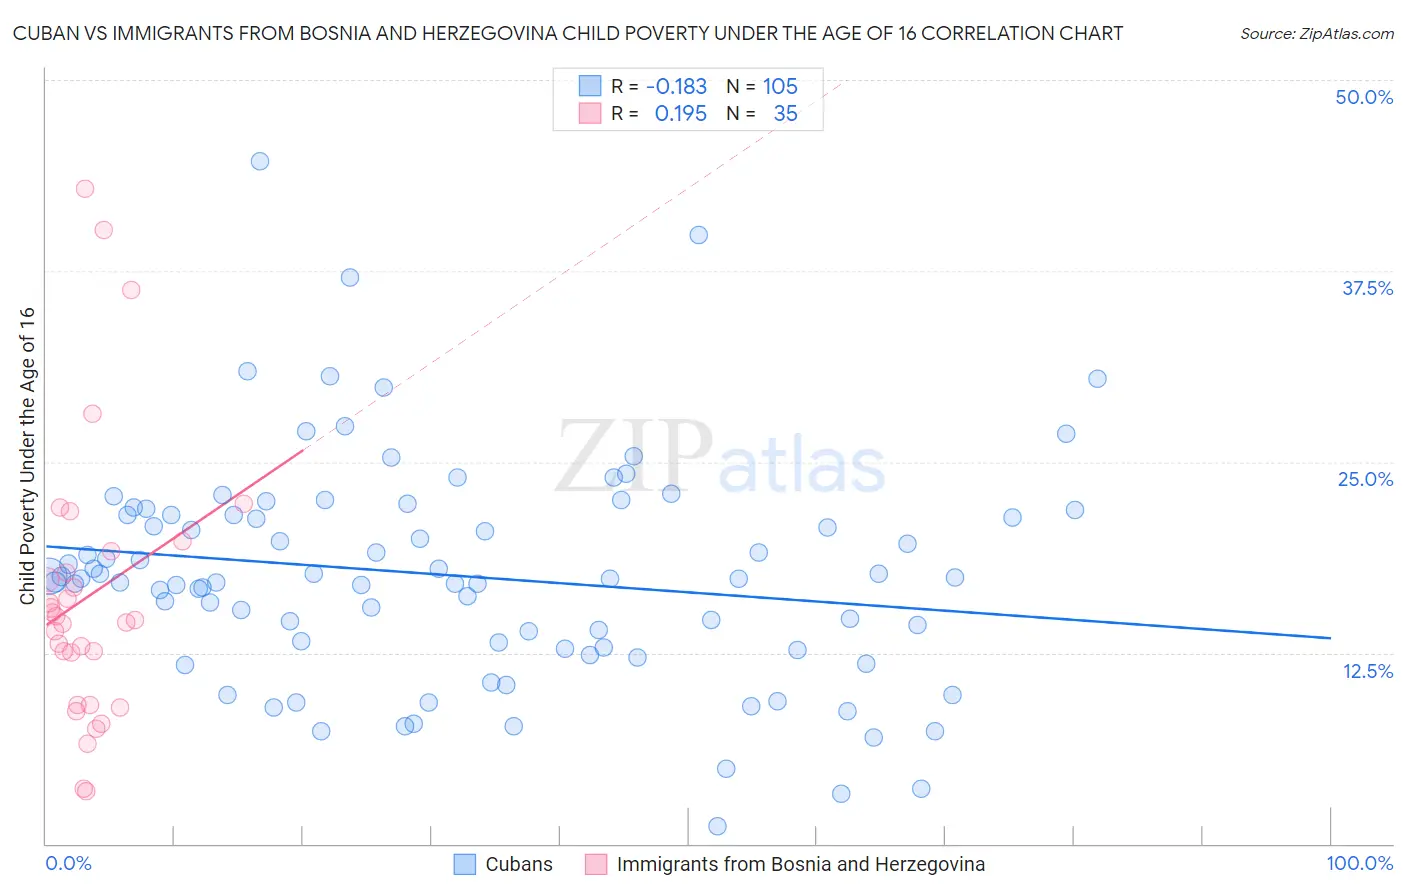 Cuban vs Immigrants from Bosnia and Herzegovina Child Poverty Under the Age of 16